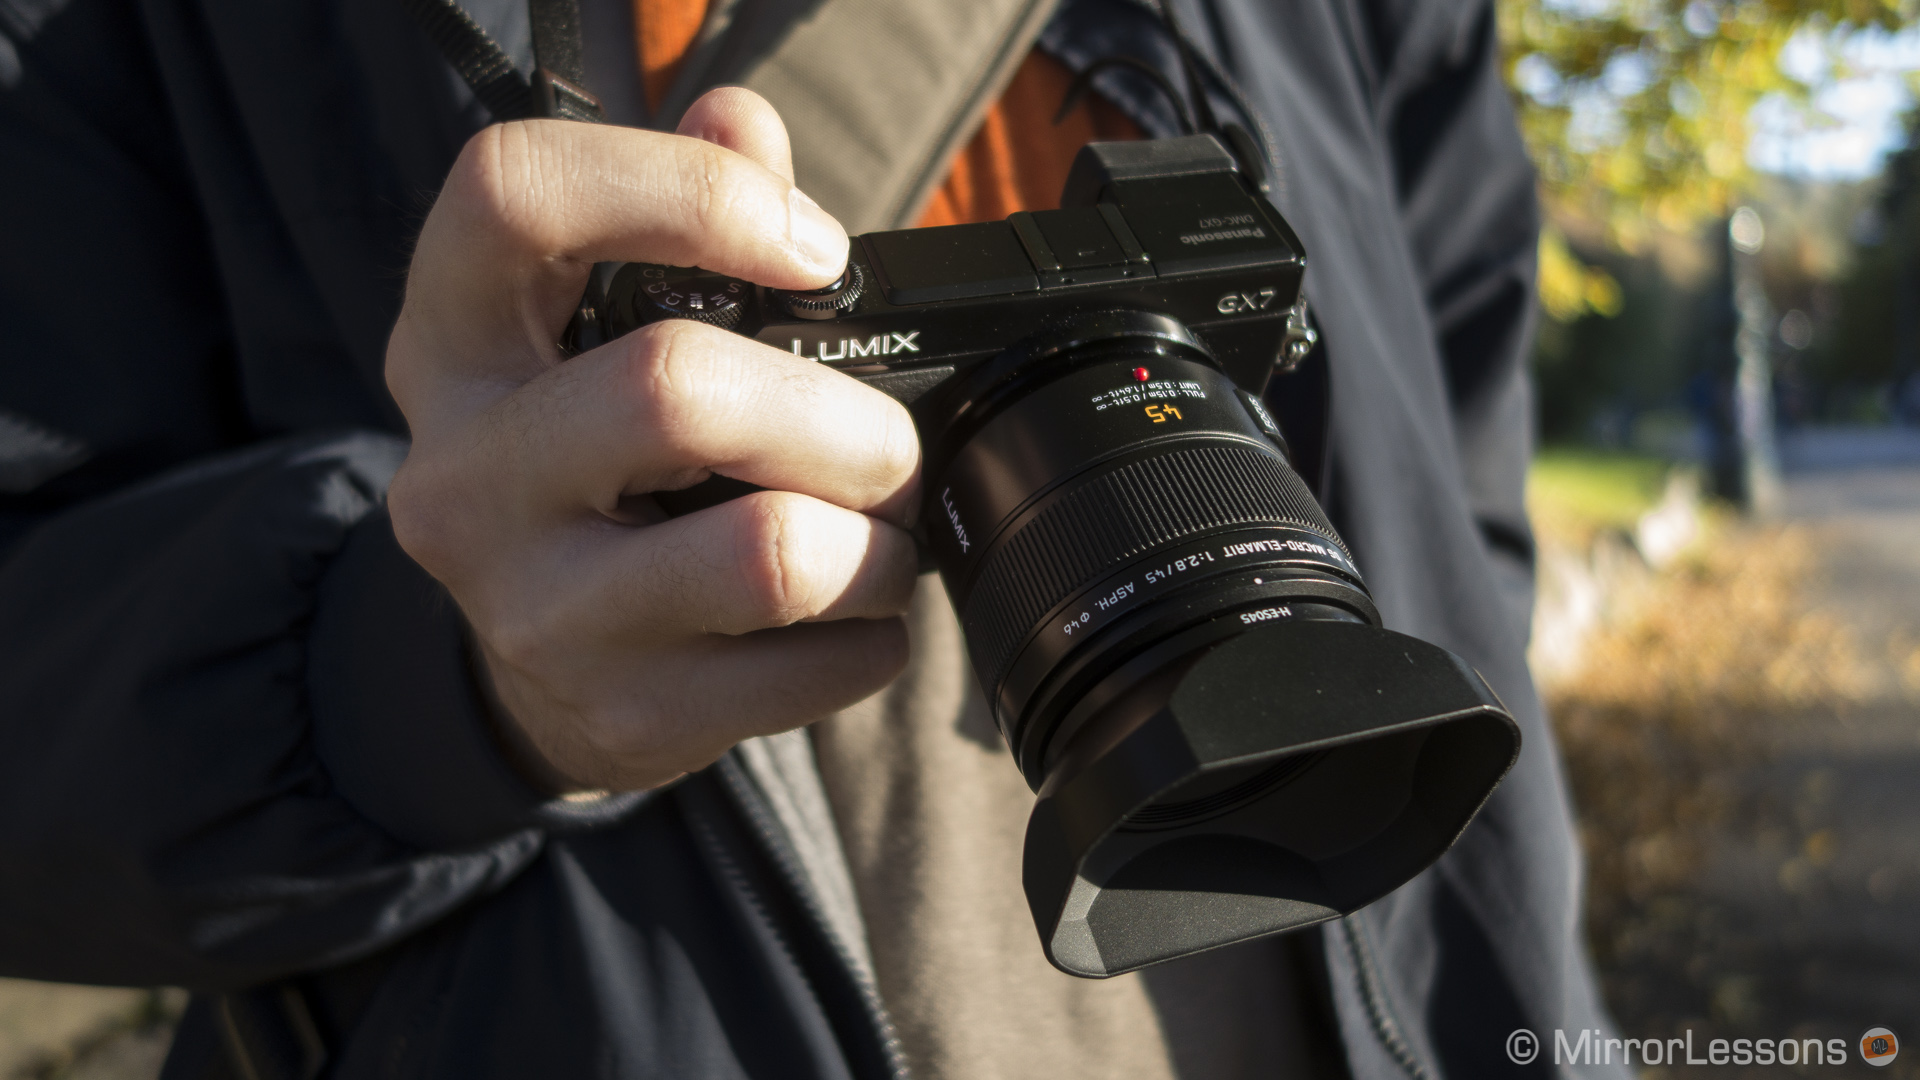 The Panasonic & Leica 45mm f/2.8 Macro: An excellent combo!